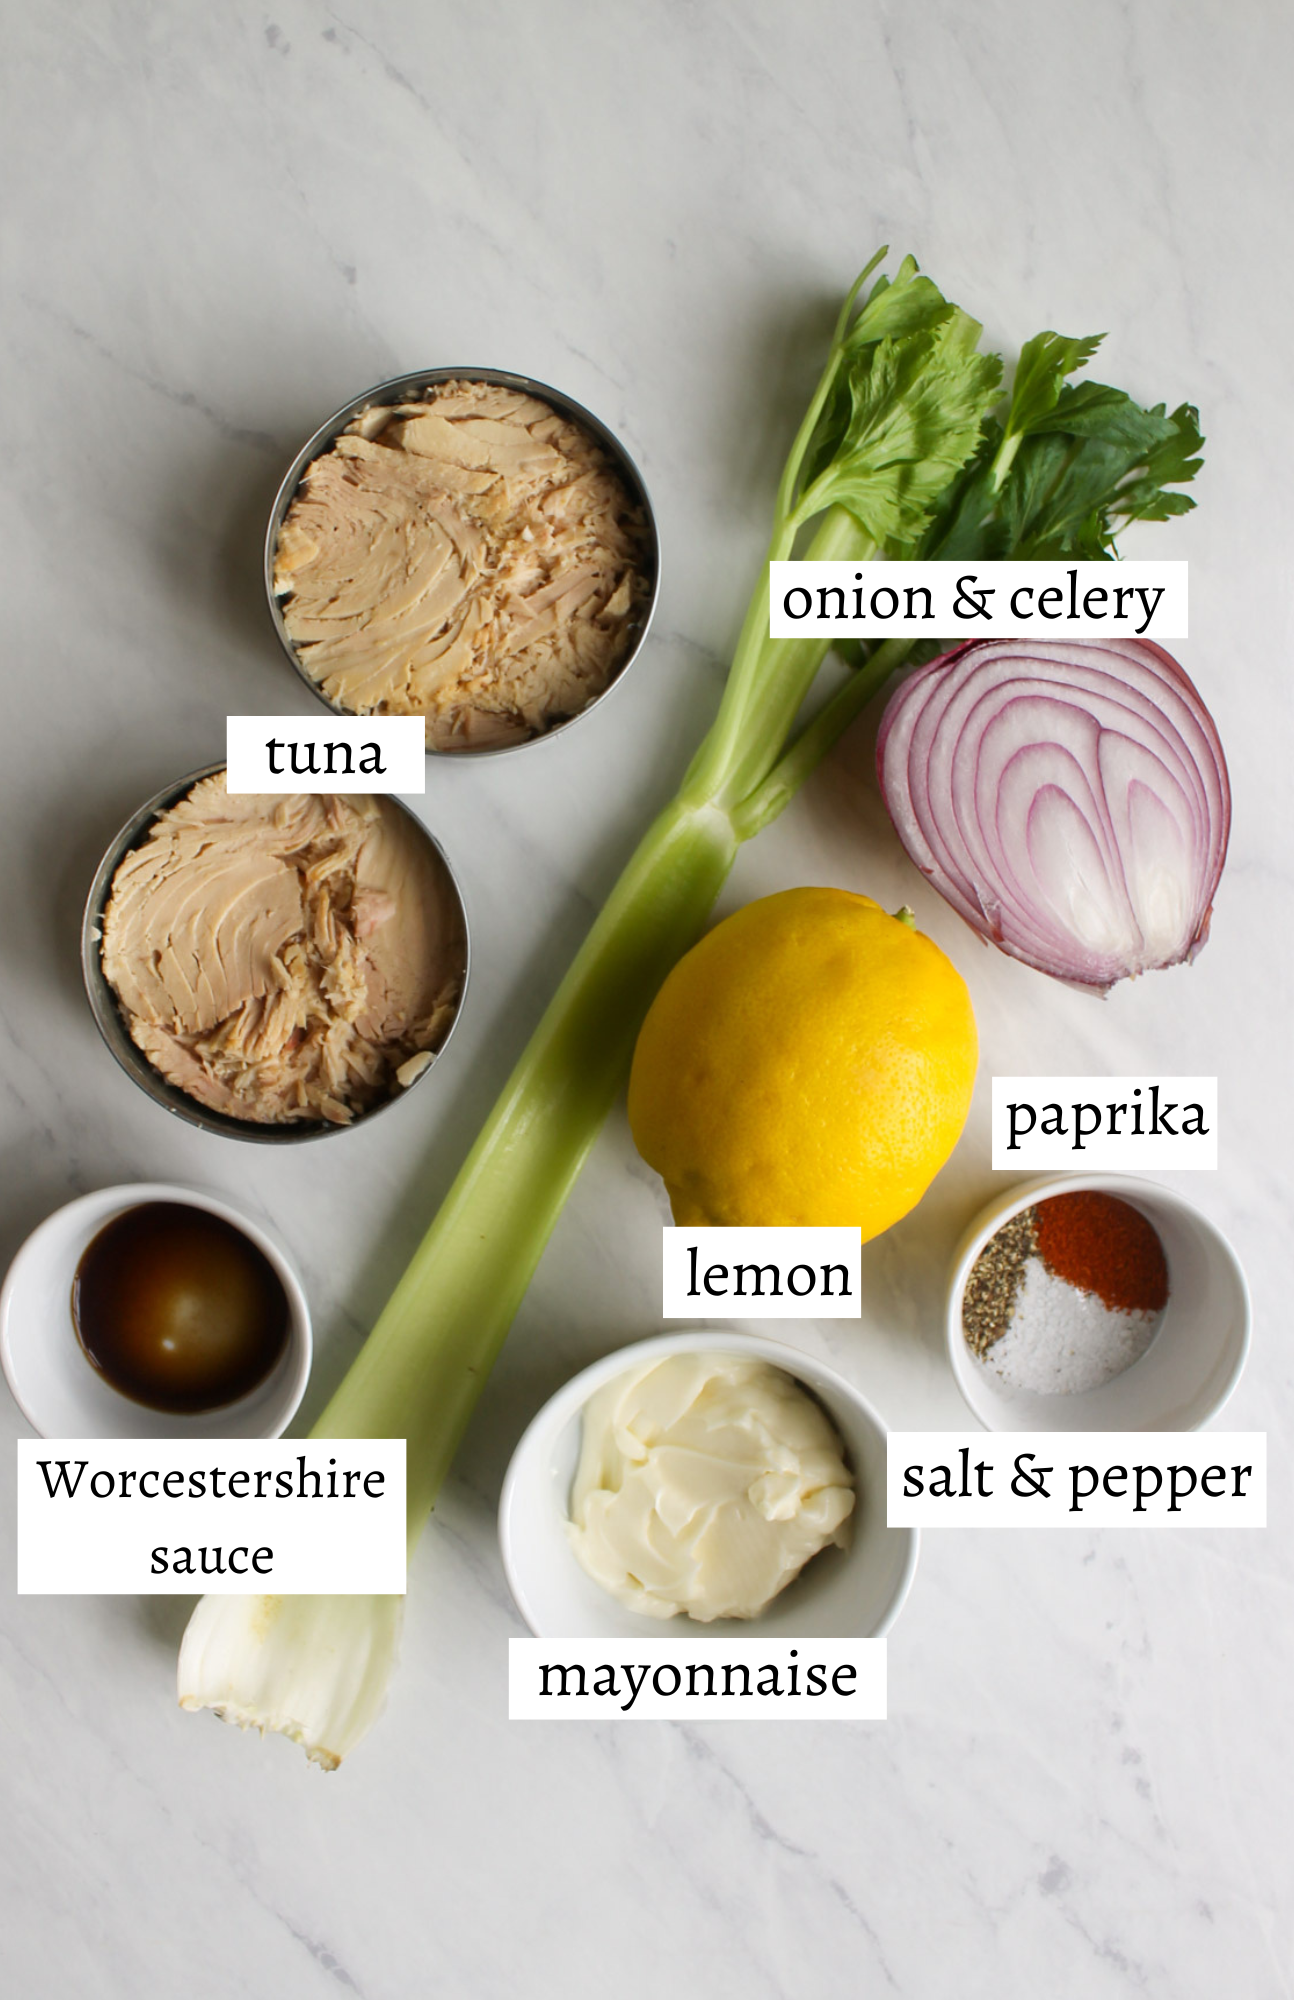 Labeled ingredients for tuna salad.